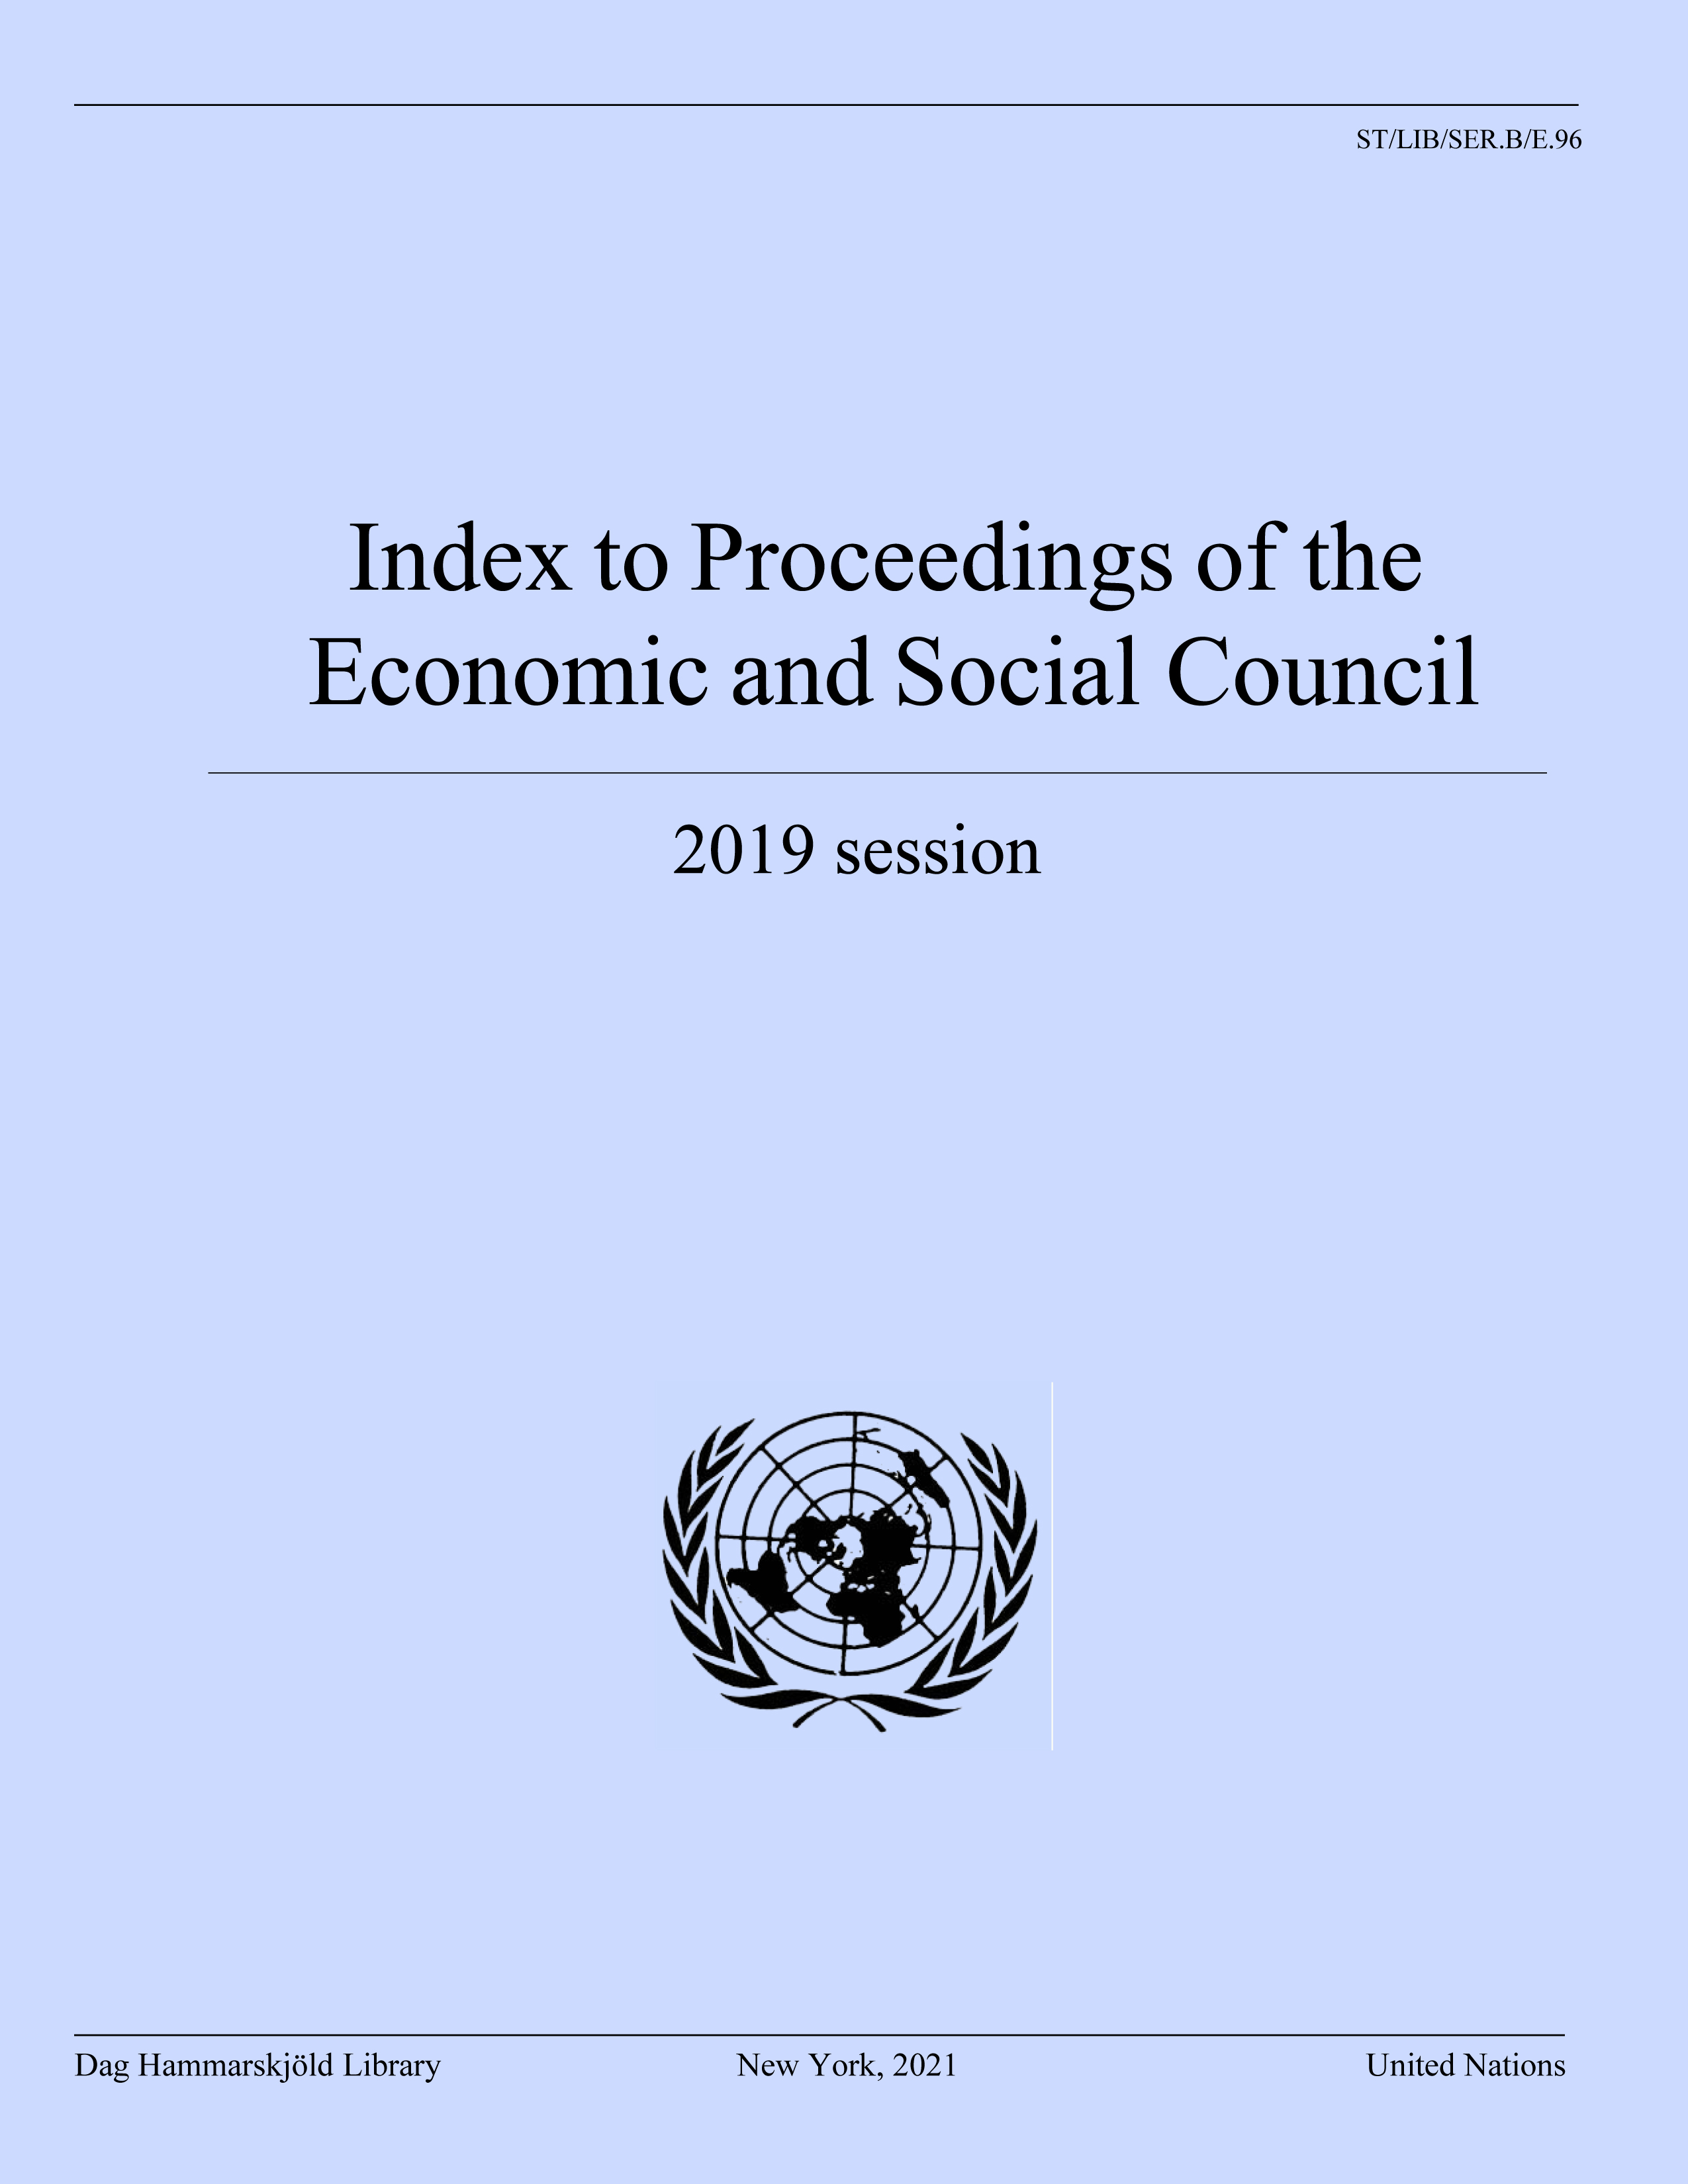 image of Index to Proceedings of the Economic and Social Council 2019